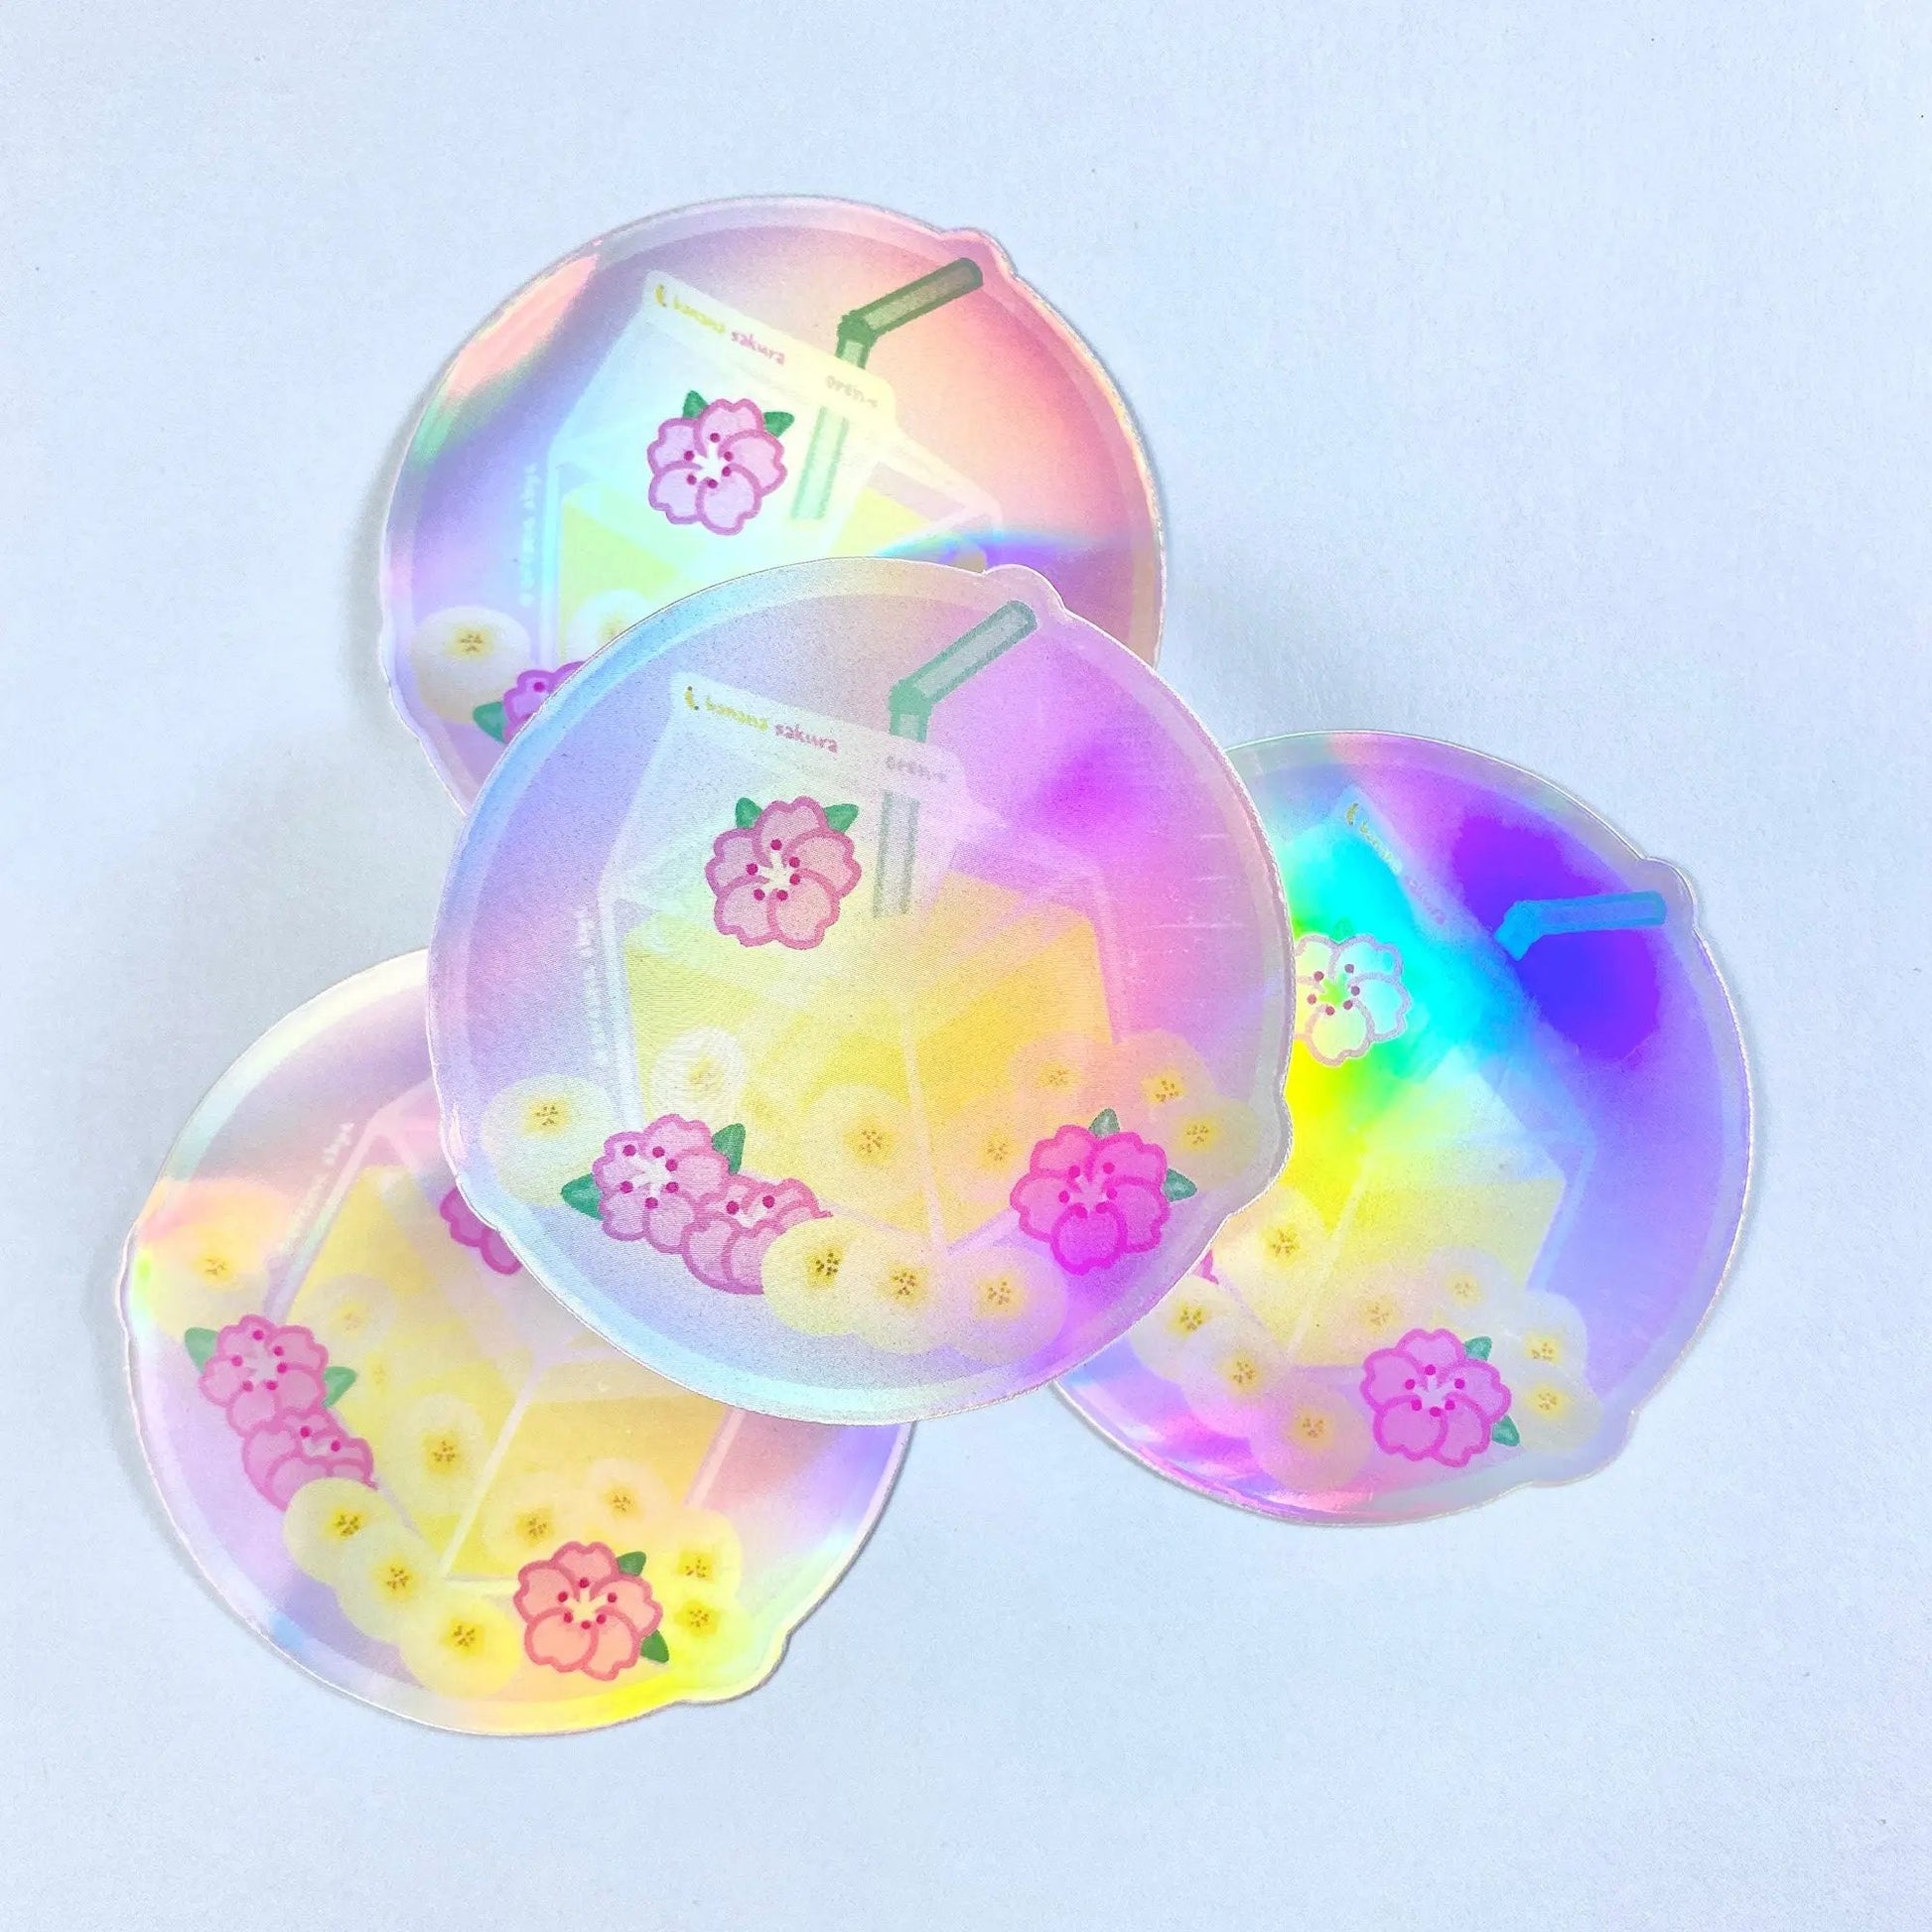 a group of plastic plates with designs on them